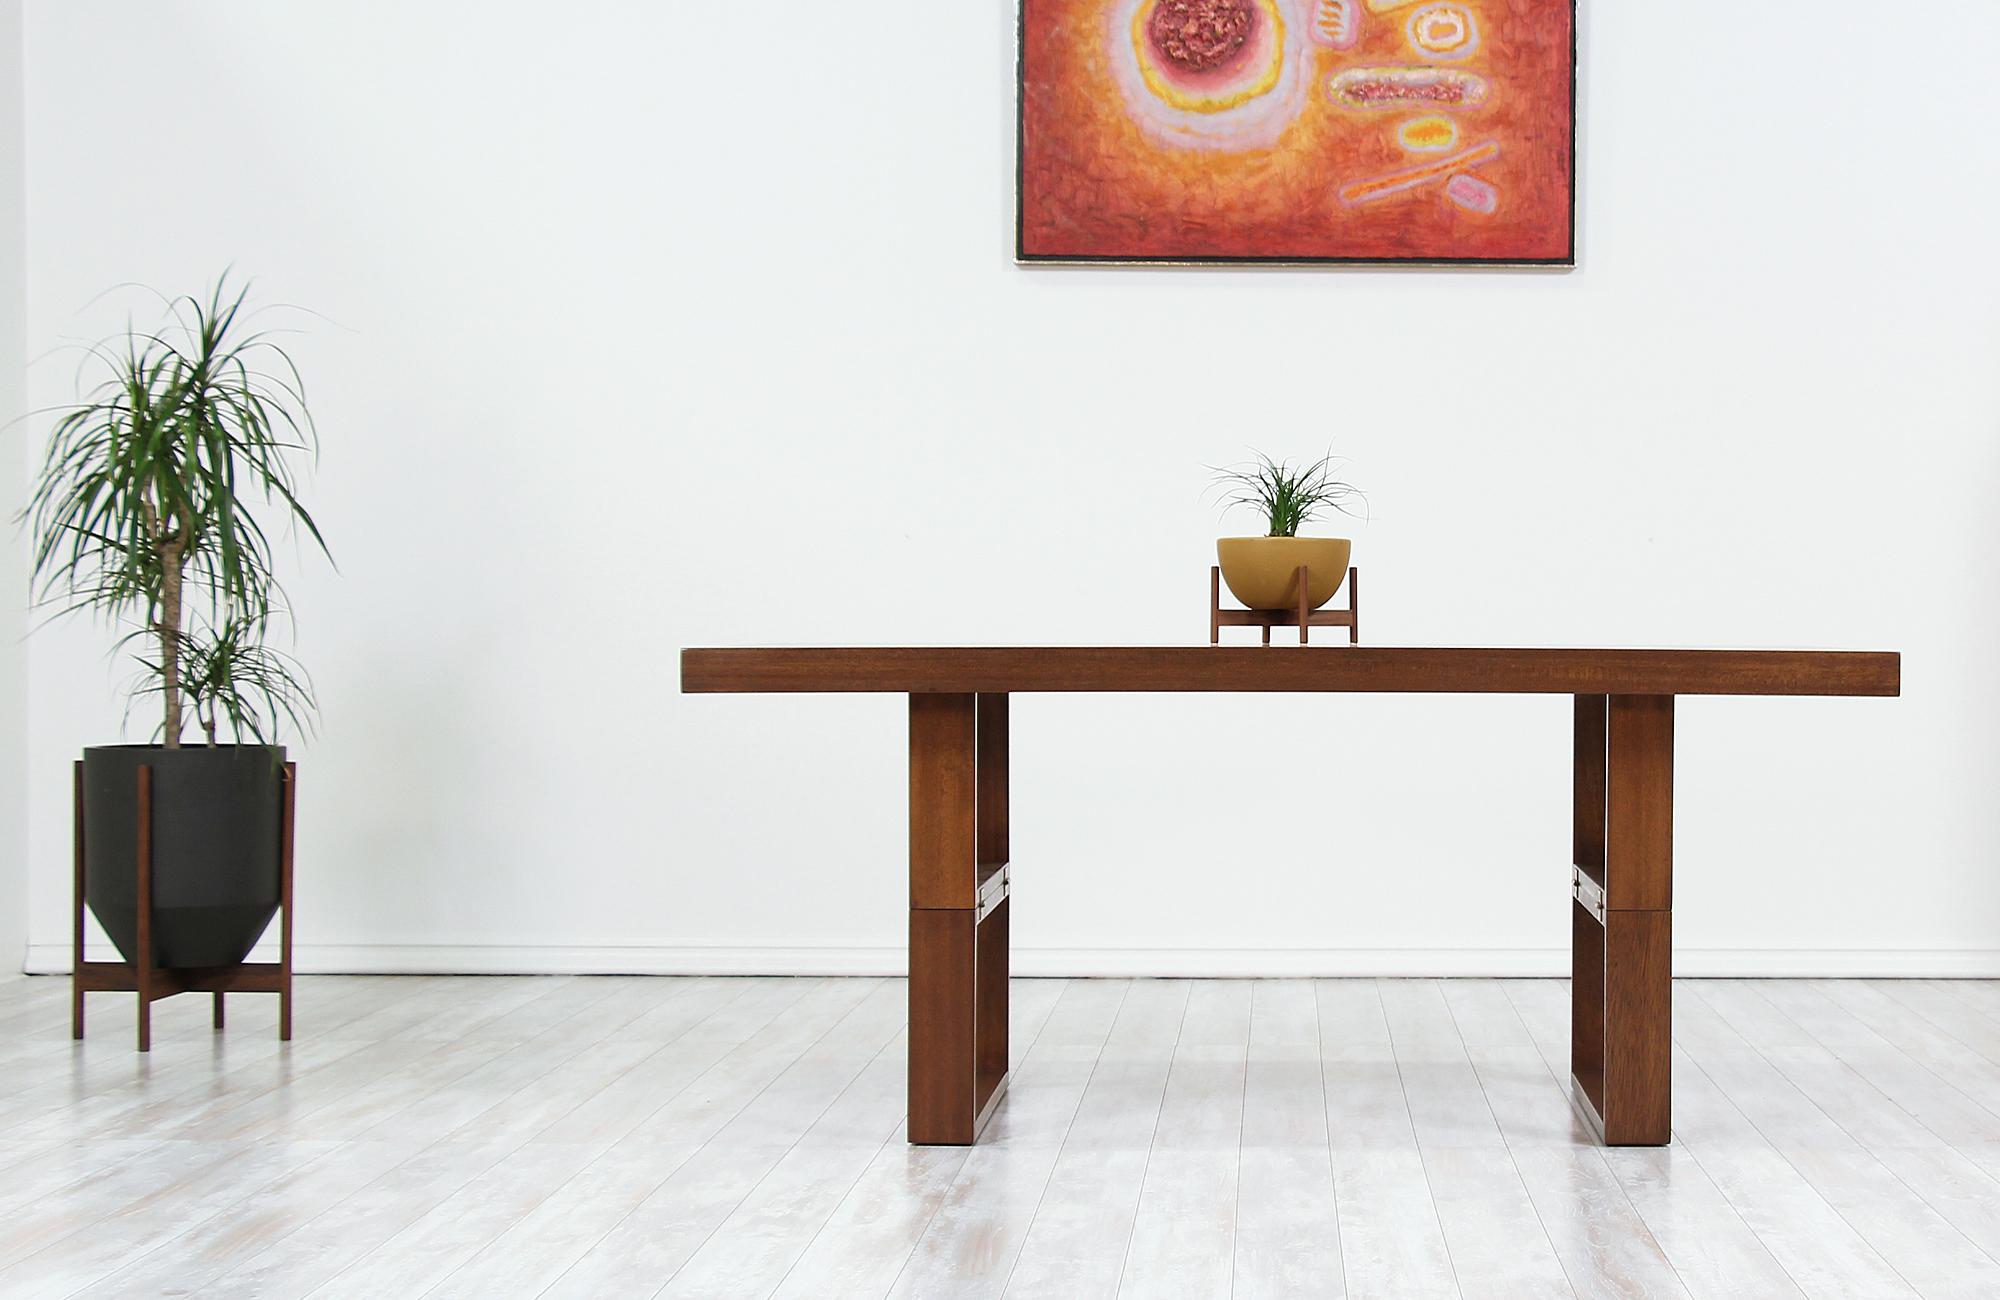 Unique table designed by Van Keppel Green and manufactured by Brown Saltman in California circa 1950s. This ingenious design features a walnut-stained mahogany frame that is supported by a linear, geometric base. Known as the Camel table due to its